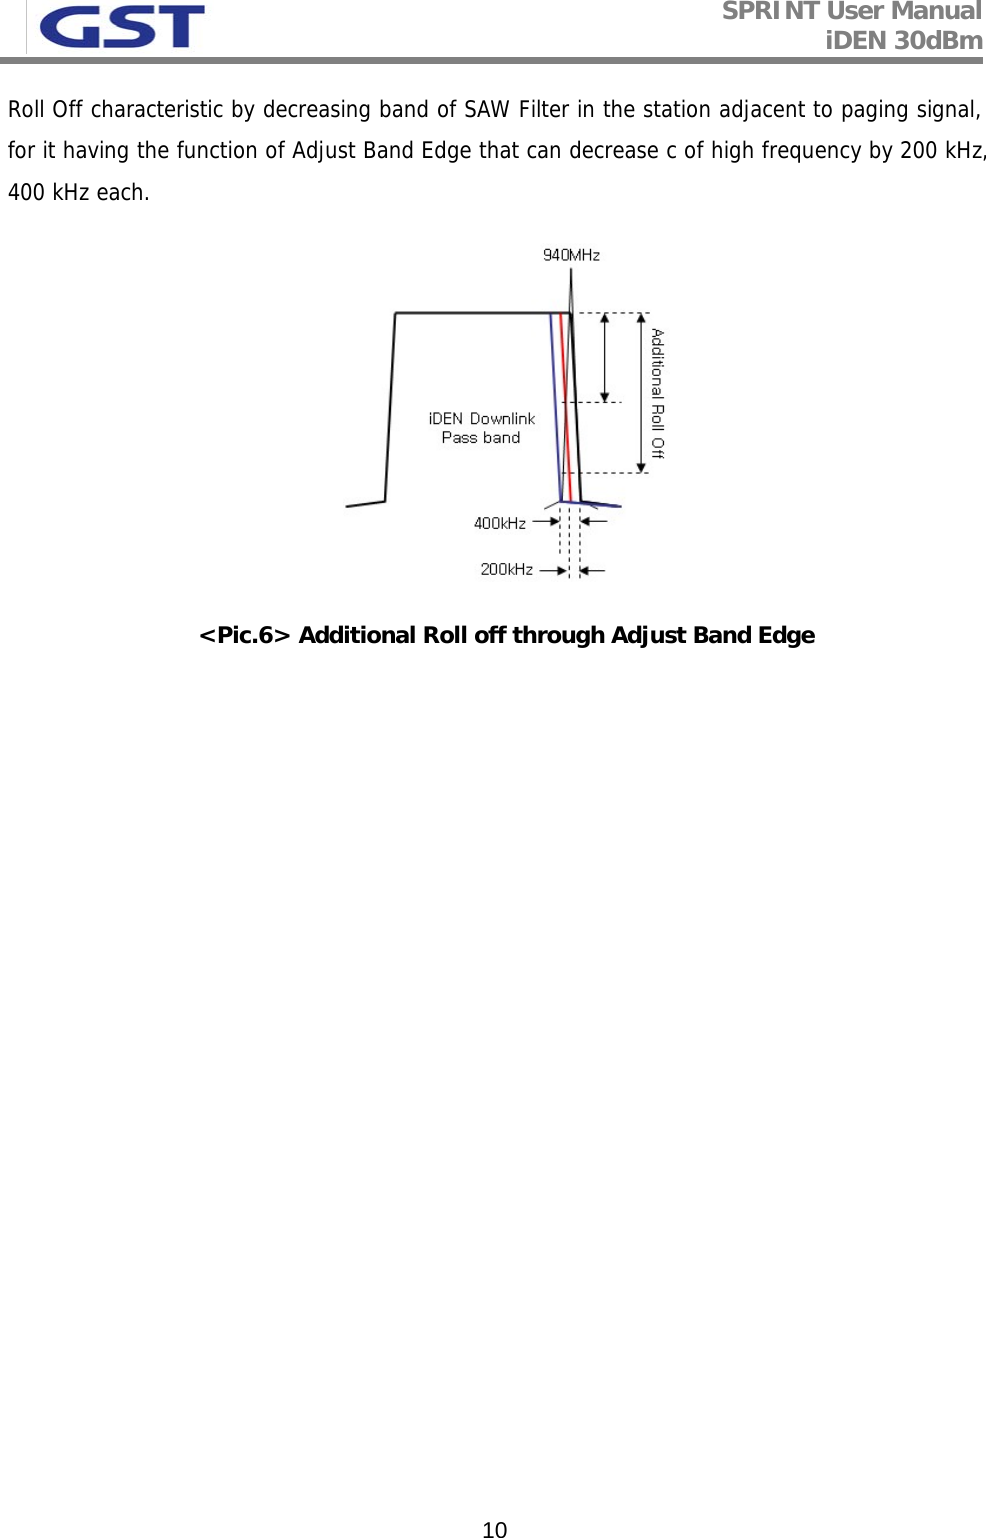 SPRINT User Manual iDEN 30dBm   10Roll Off characteristic by decreasing band of SAW Filter in the station adjacent to paging signal, for it having the function of Adjust Band Edge that can decrease c of high frequency by 200 kHz, 400 kHz each.  &lt;Pic.6&gt; Additional Roll off through Adjust Band Edge                      